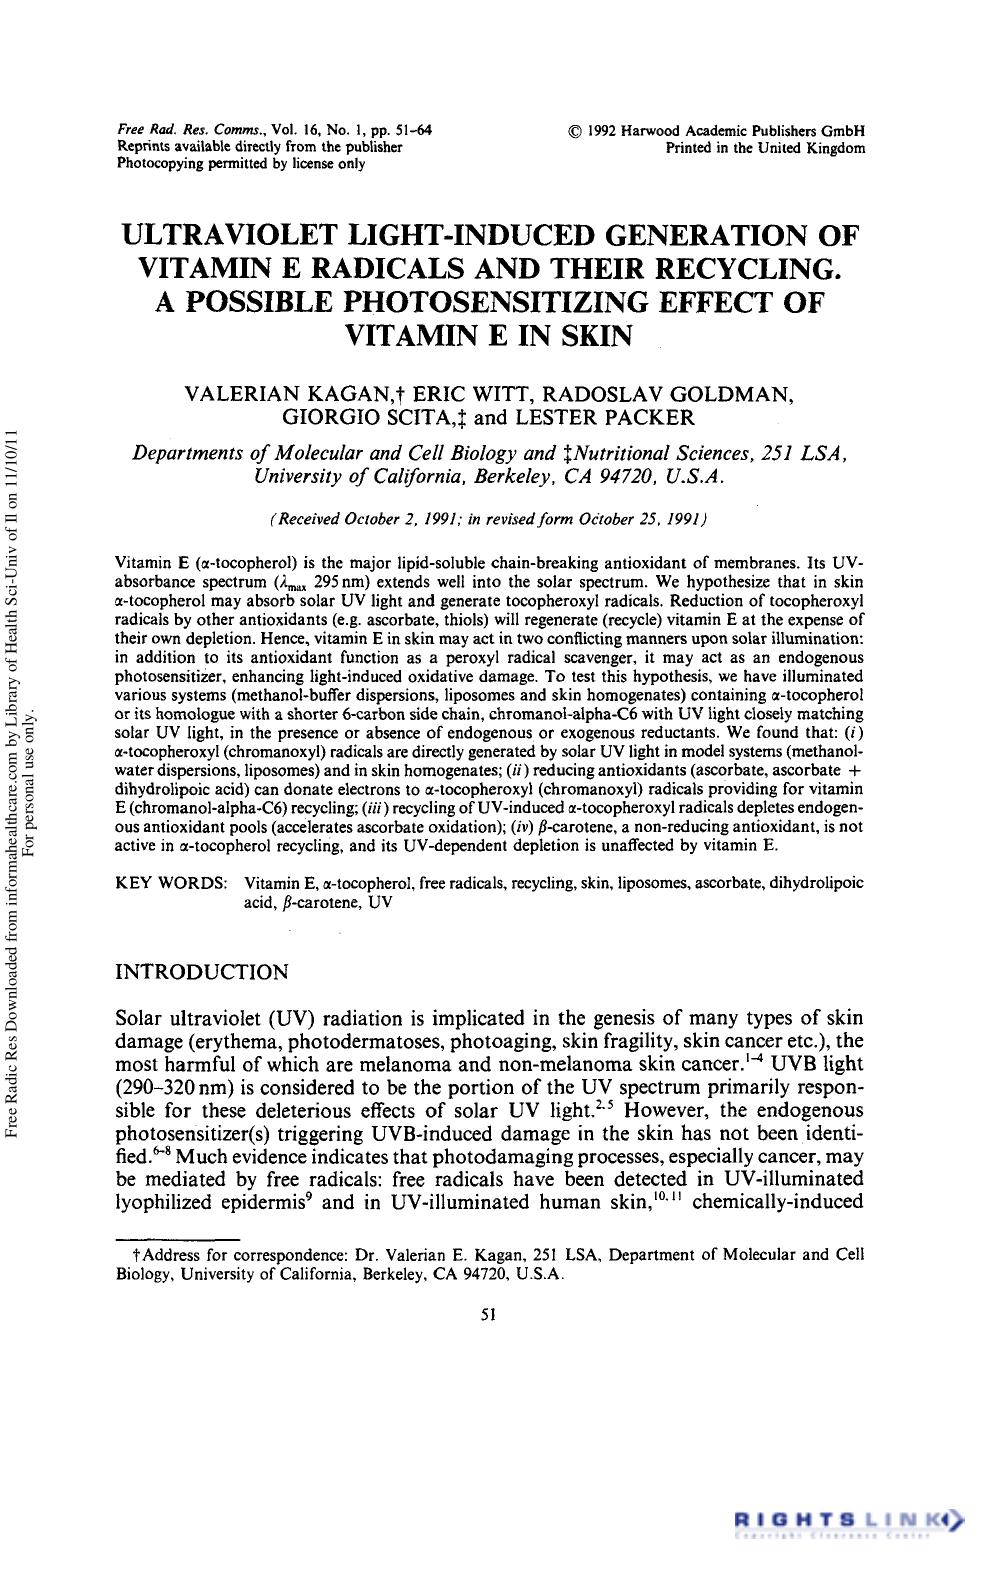 Ultraviolet Light-Induced Generation of Vitamin E Radicals and Their Recycling. a Possible Photosensitizing Effect of Vitamin E IN Skin by Valerian Kagan1† Eric Witt1 Radoslav Goldman1 Giorgio Scita2 & Lester Packer1